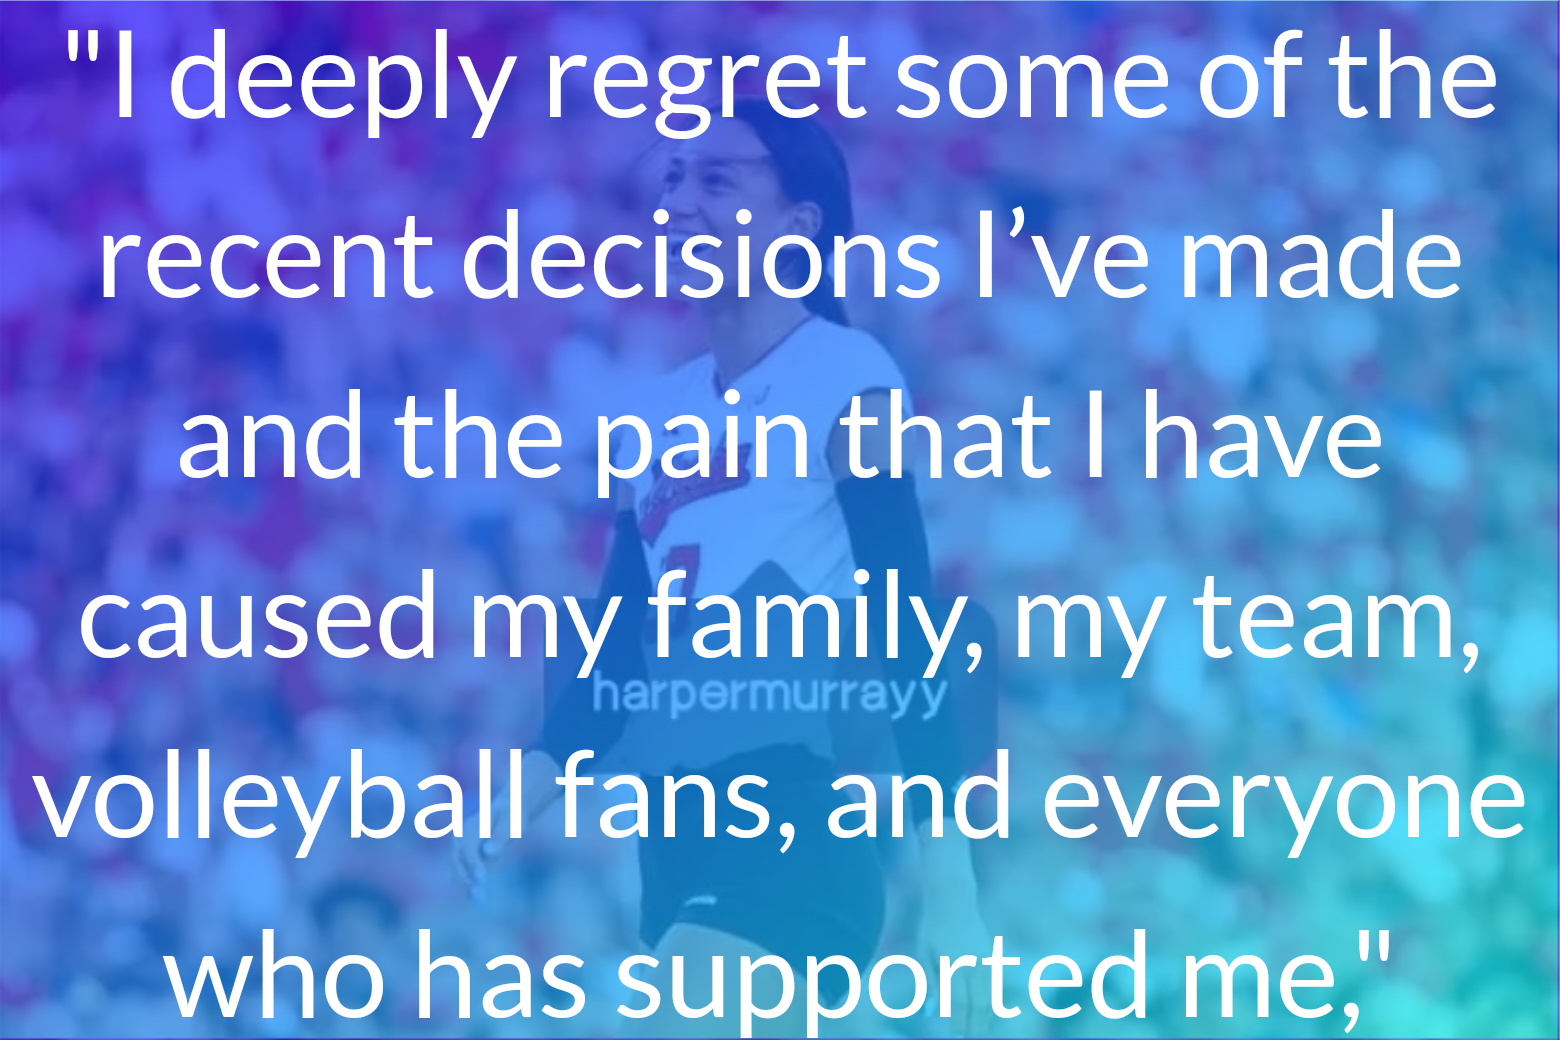 Harper Murray Released a Statement